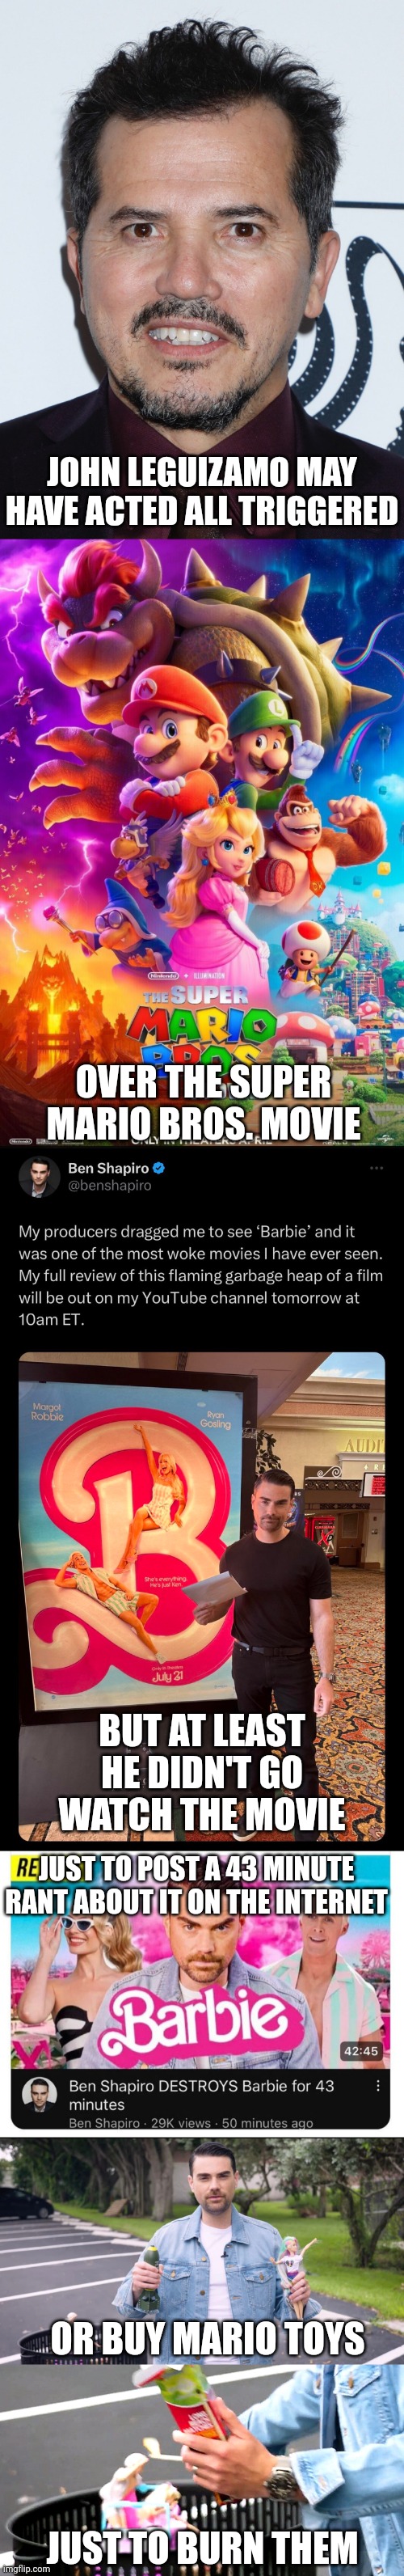 Ben Shapiro is acting all triggered over the Barbie movie, a lot worse than John Leguizamo over the Mario movie | JOHN LEGUIZAMO MAY HAVE ACTED ALL TRIGGERED; OVER THE SUPER MARIO BROS. MOVIE; BUT AT LEAST HE DIDN'T GO WATCH THE MOVIE; JUST TO POST A 43 MINUTE RANT ABOUT IT ON THE INTERNET; OR BUY MARIO TOYS; JUST TO BURN THEM | image tagged in ben shapiro,conservative hypocrisy,triggered,movies,hollywood,barbie | made w/ Imgflip meme maker